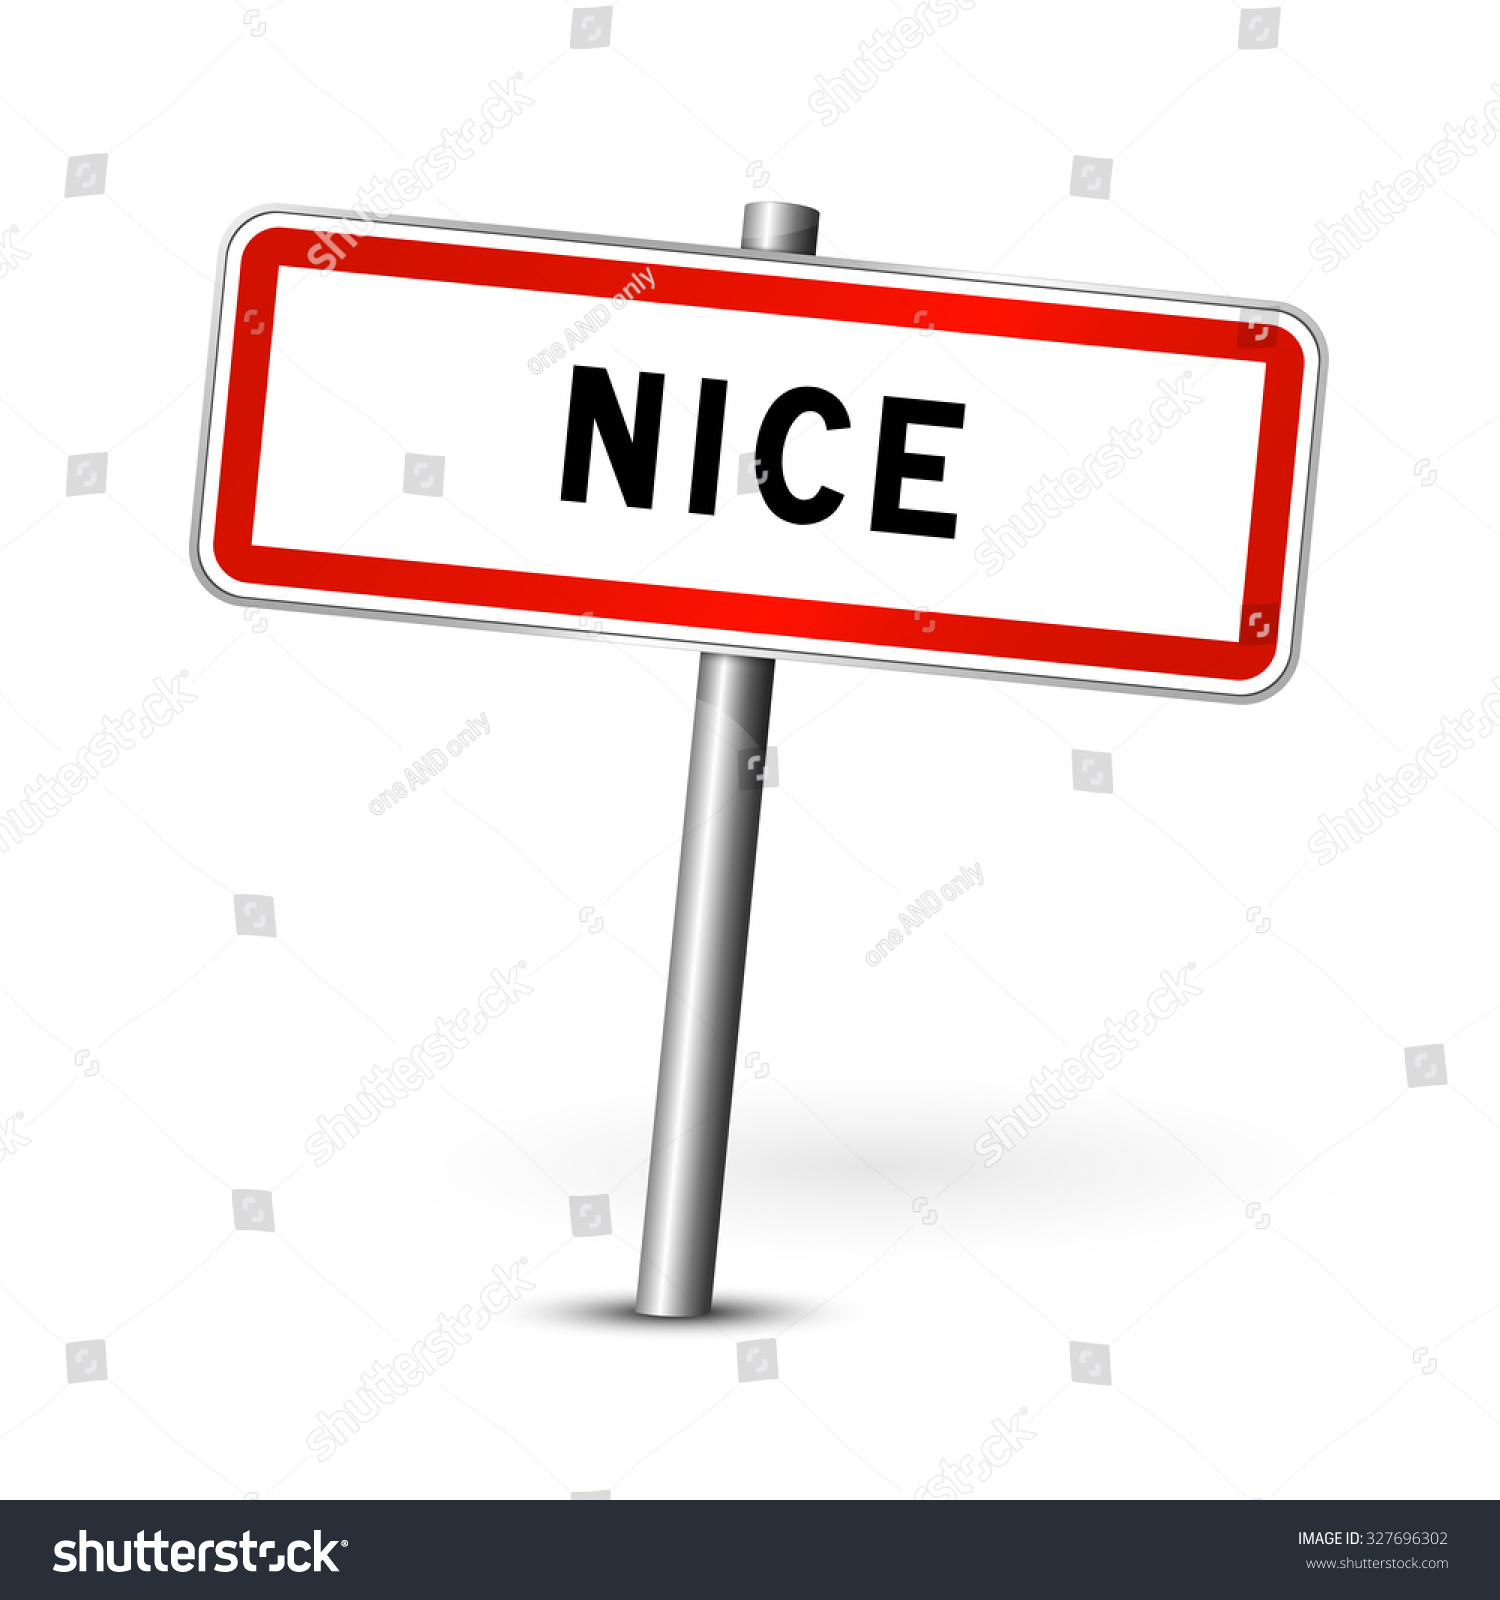 stock-vector-nice-france-city-road-sign-